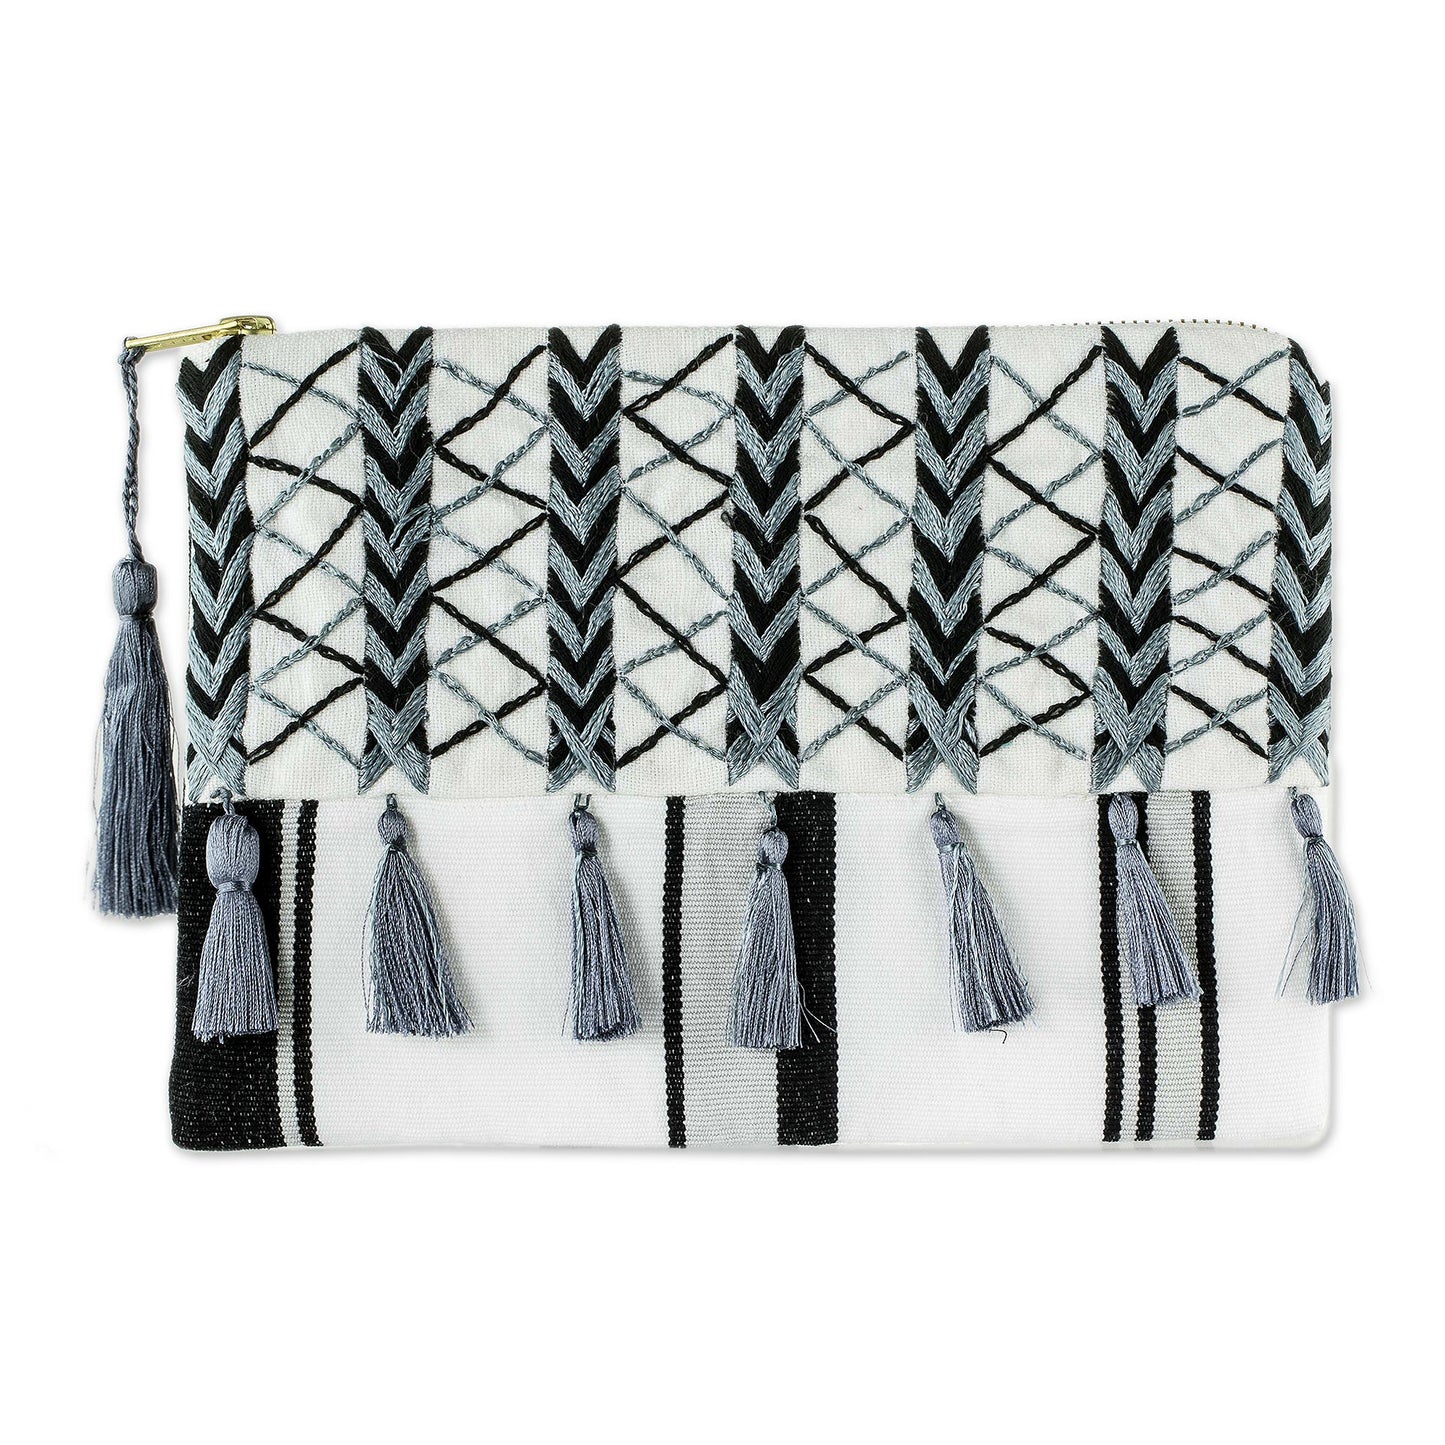 Monochrome Zigzags Black & Grey Embroidered White Cotton Cosmetic Bag